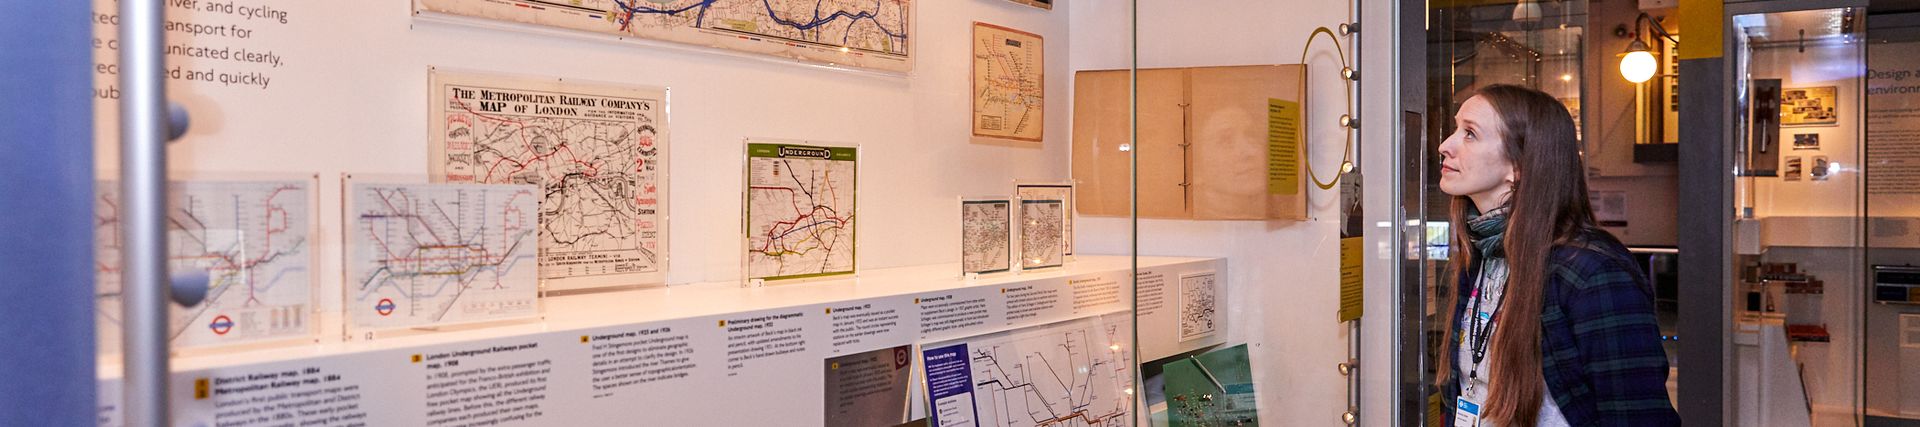 A young woman looks at a display of old underground maps